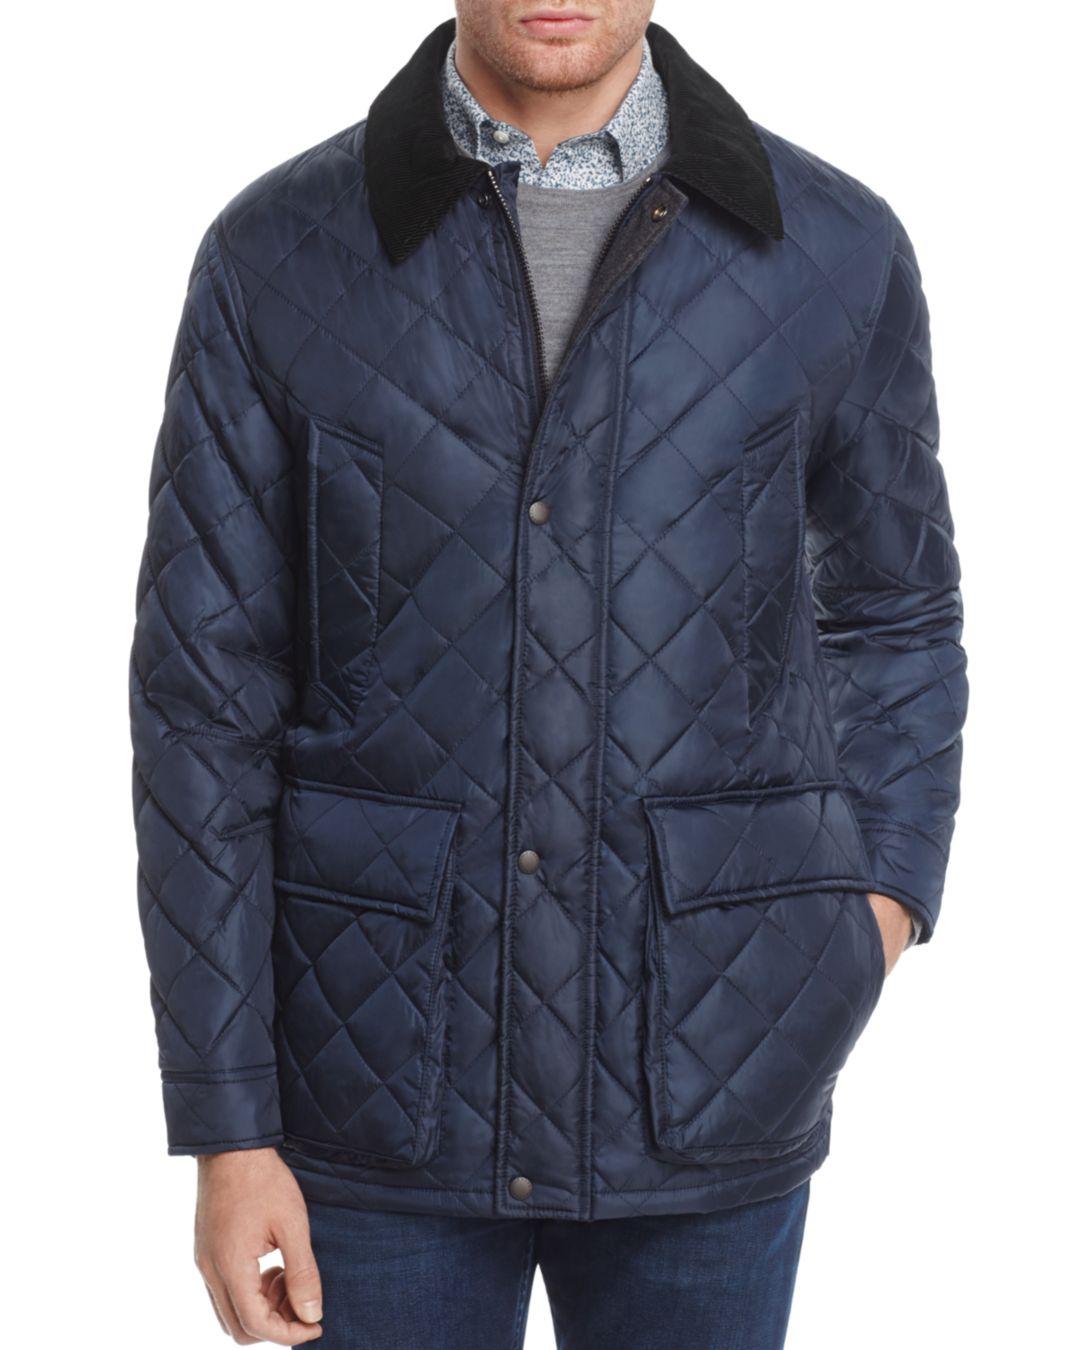 Cole Haan Quilted Elbow - Patch Jacket in Navy (Blue) for Men - Lyst